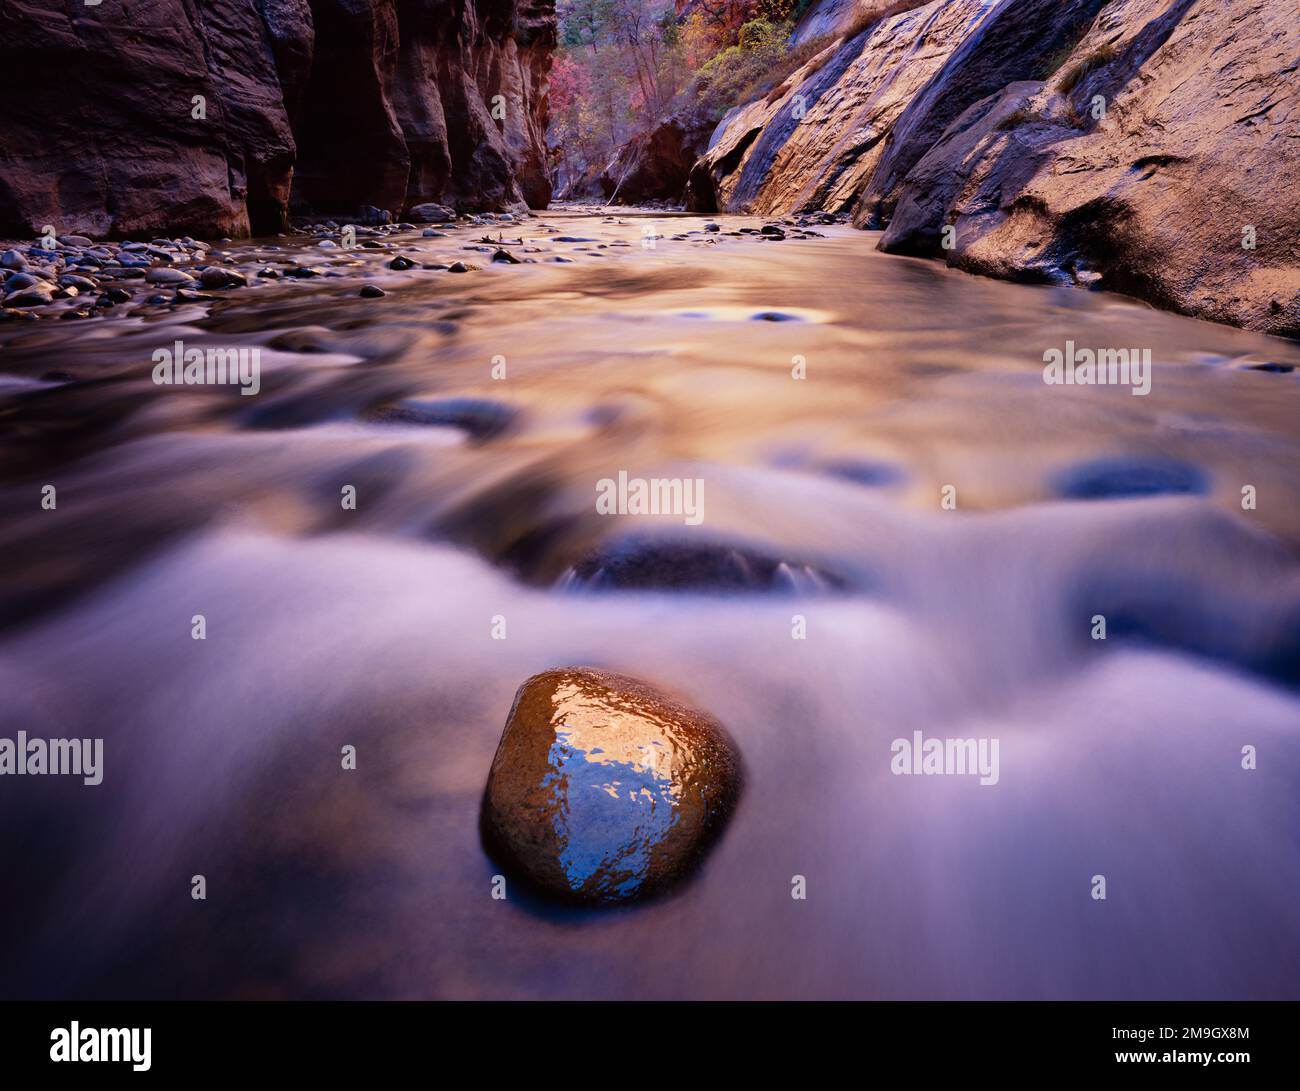 Landscape with river in canyon, Zion National Park, Utah, USA Stock Photo